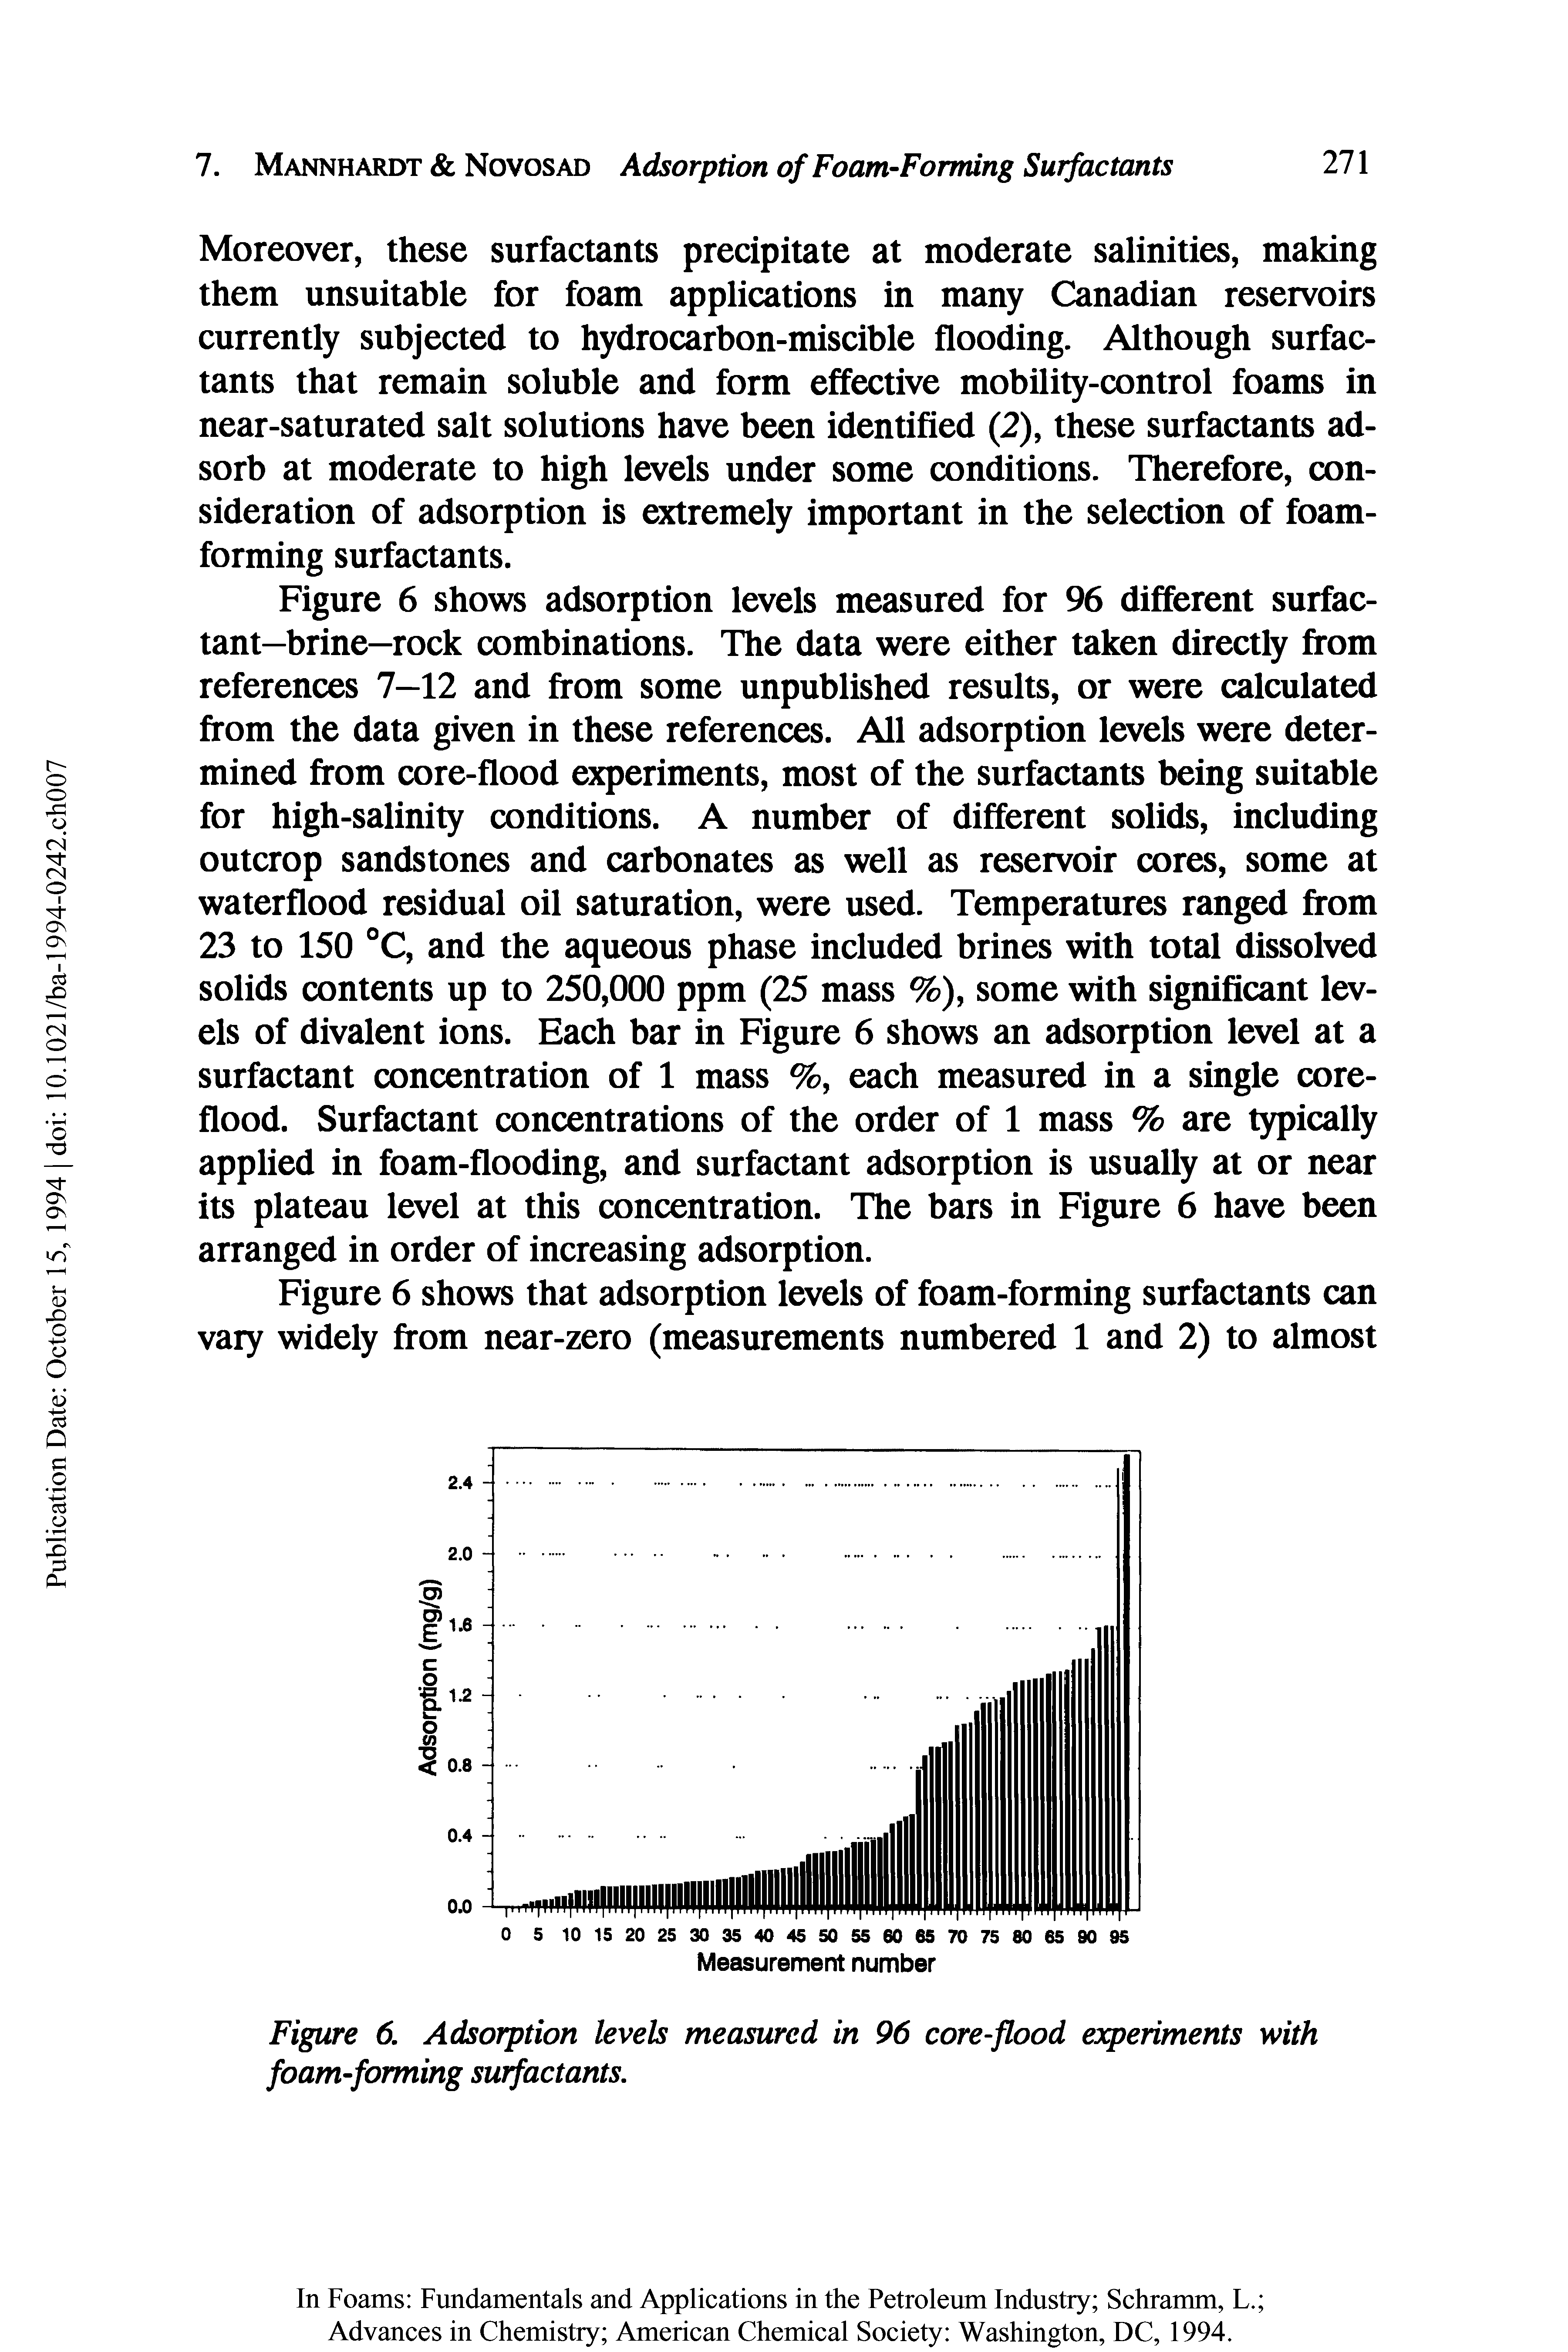 Figure 6. Adsorption levels measured in 96 core-flood experiments with foam-forming surfactants.